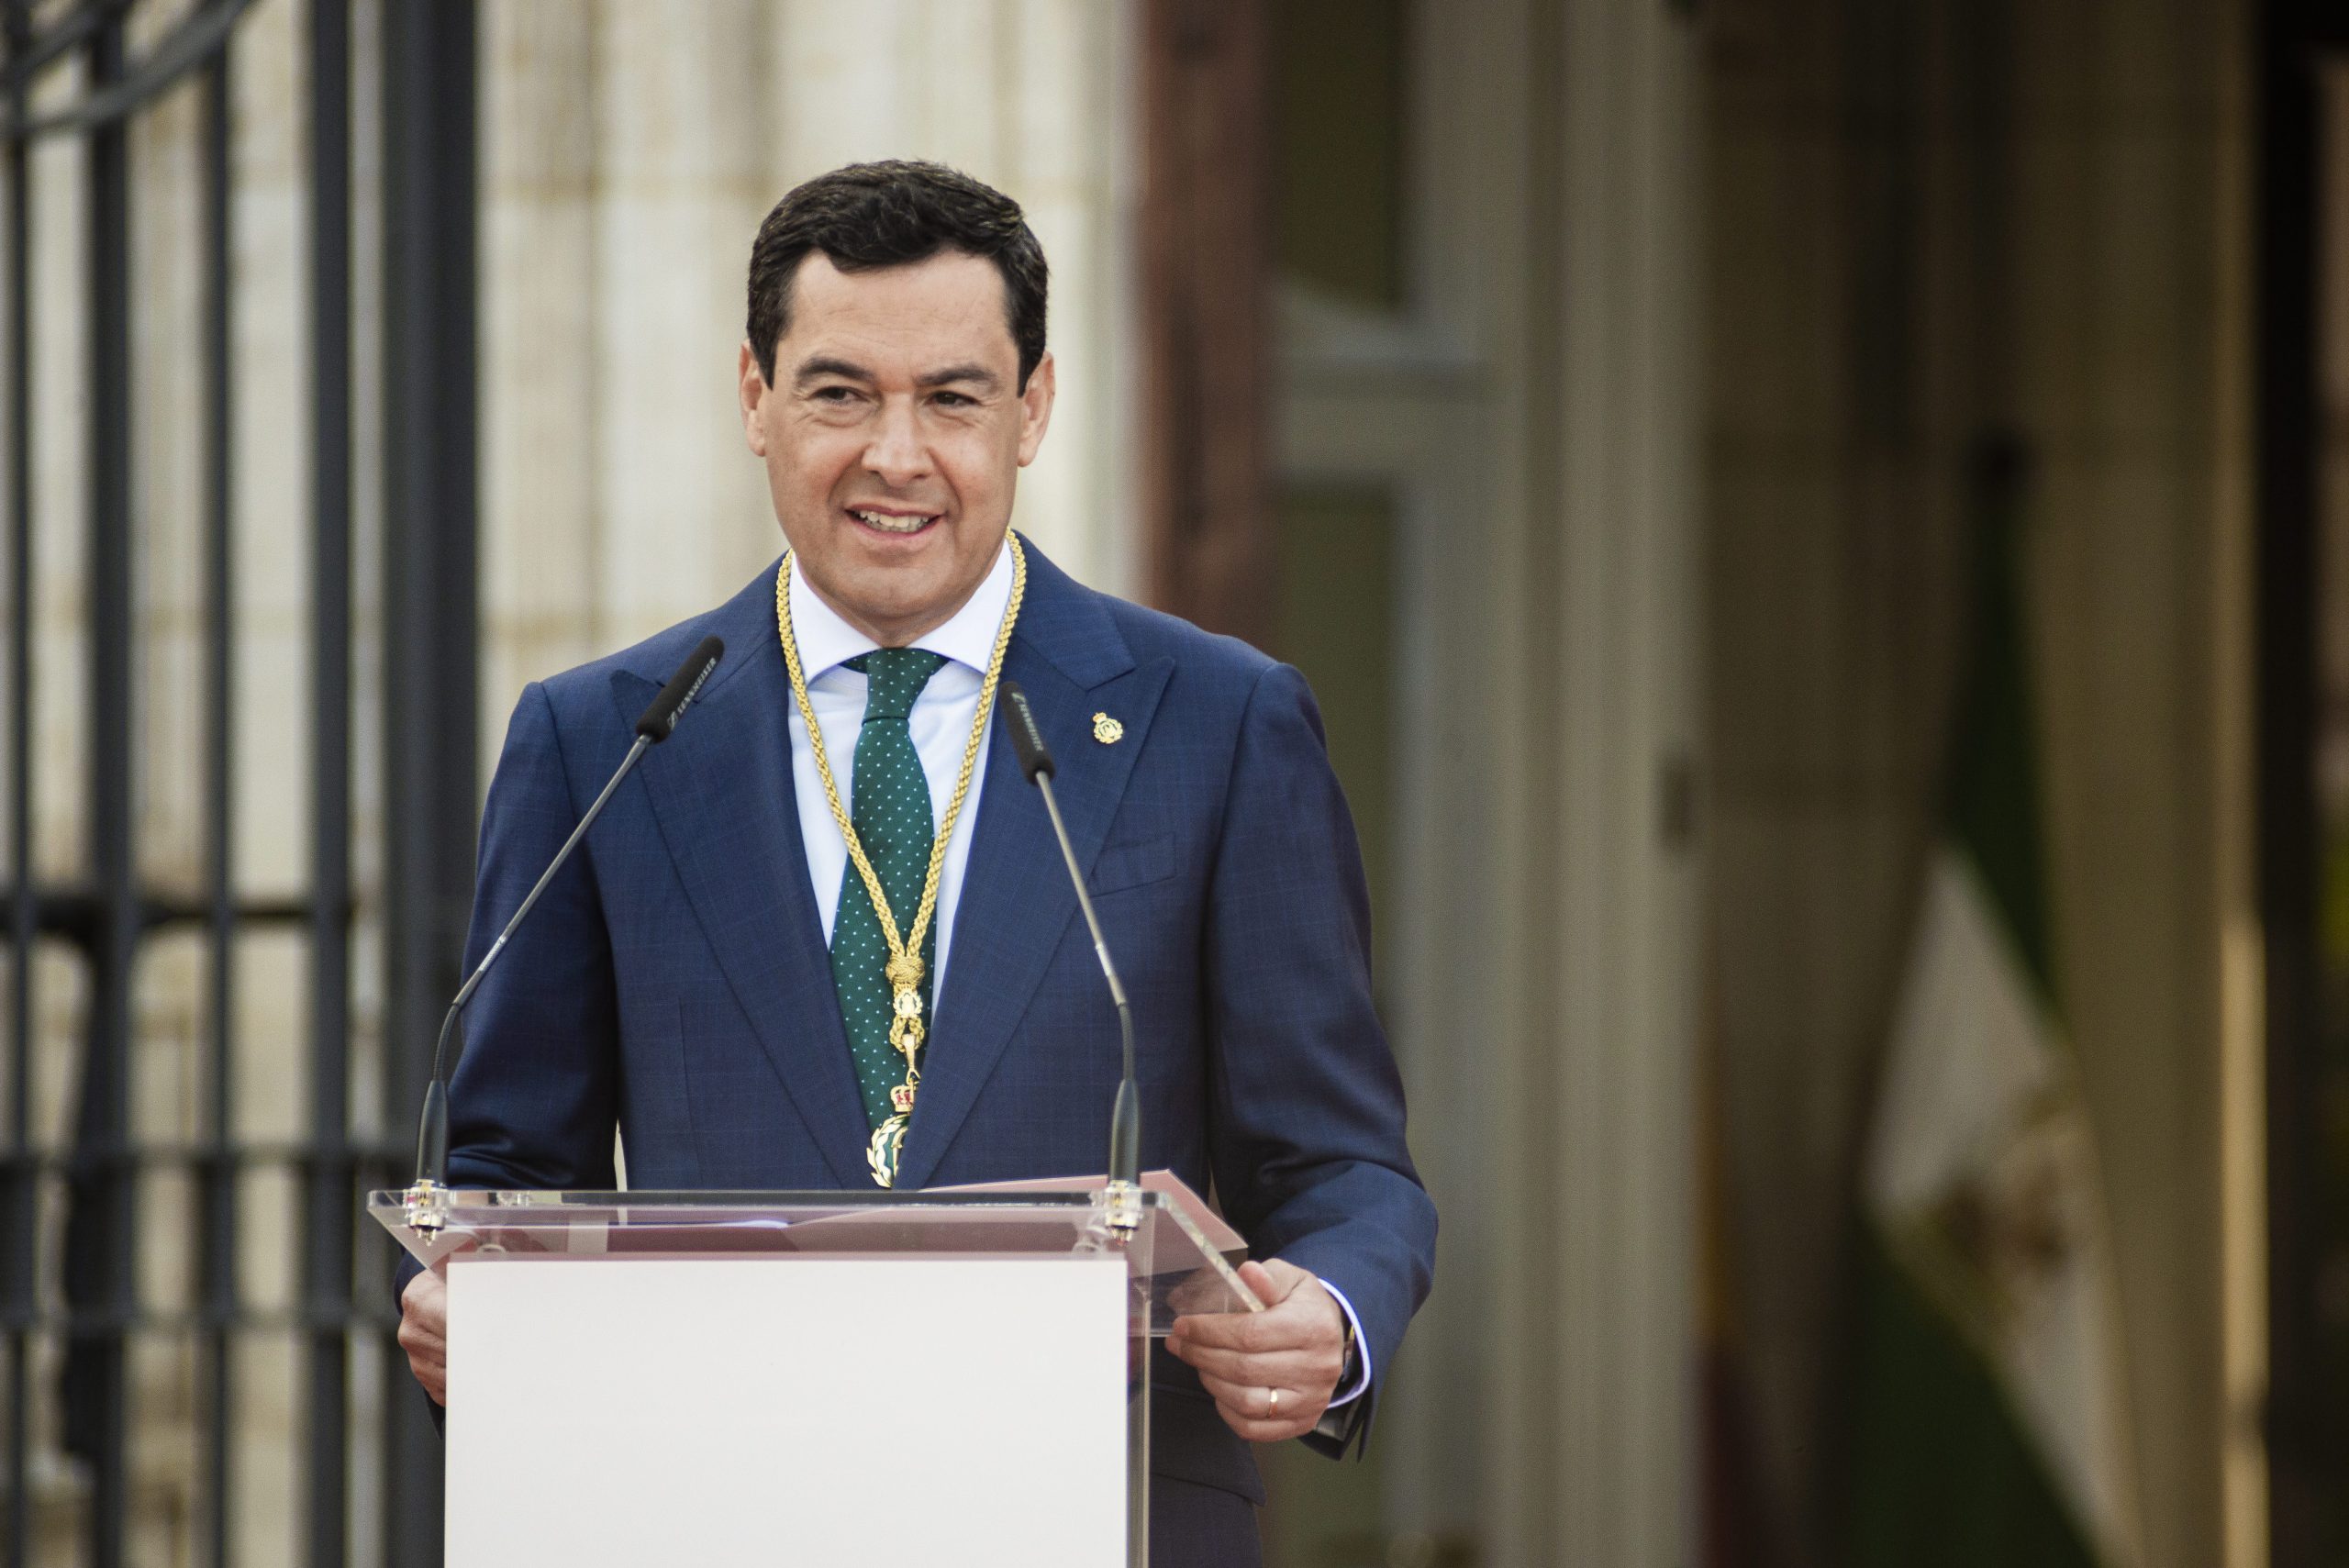 Act Of Inaguration Of Juanma Moreno As New President Of Andalusia